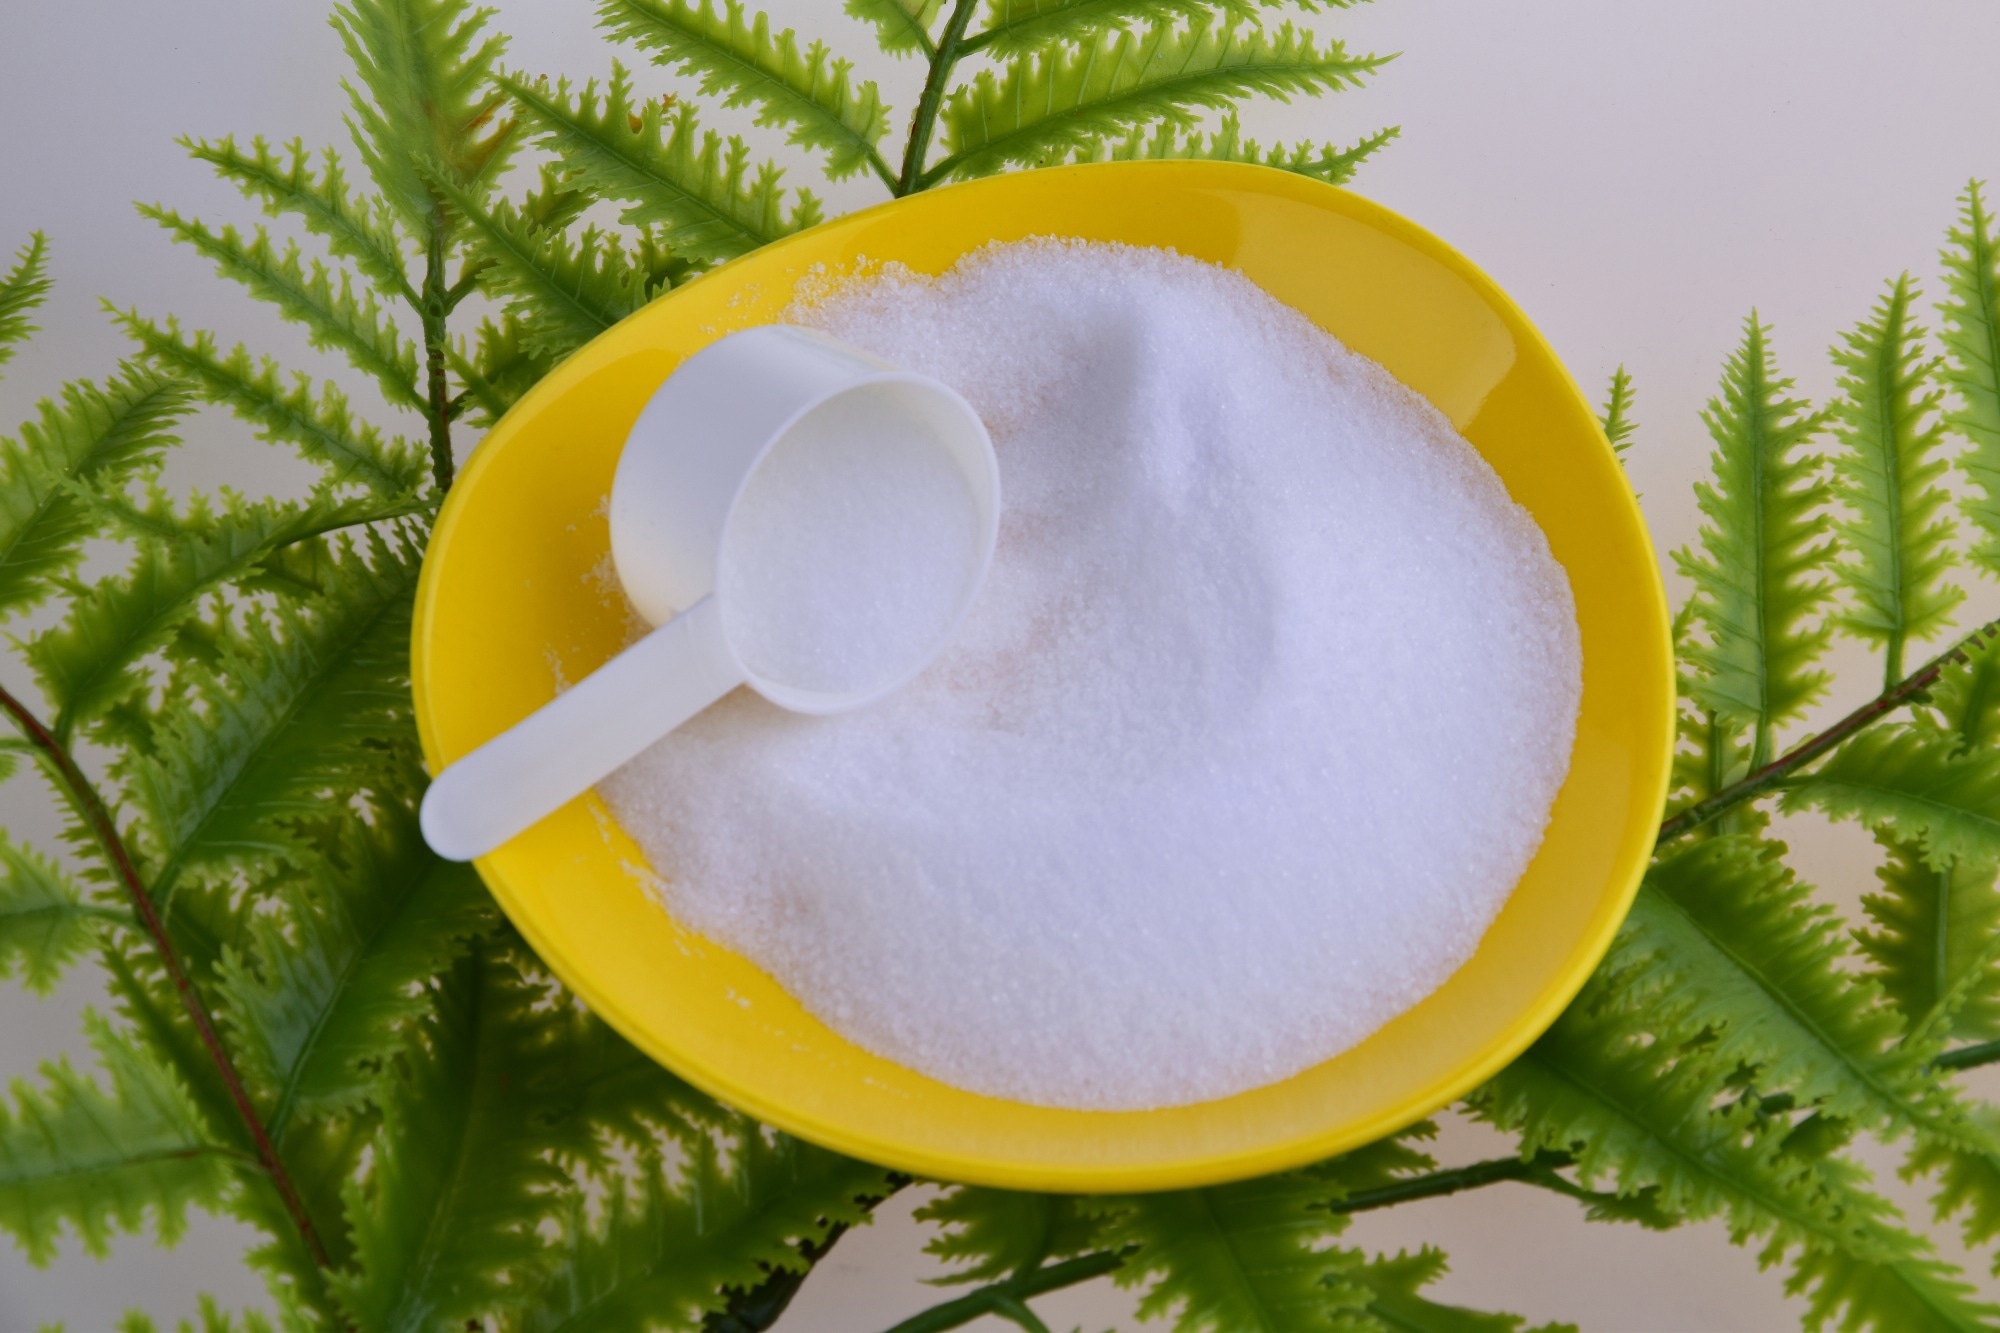 Do non-nutritive sweeteners harm the gut microbiome?